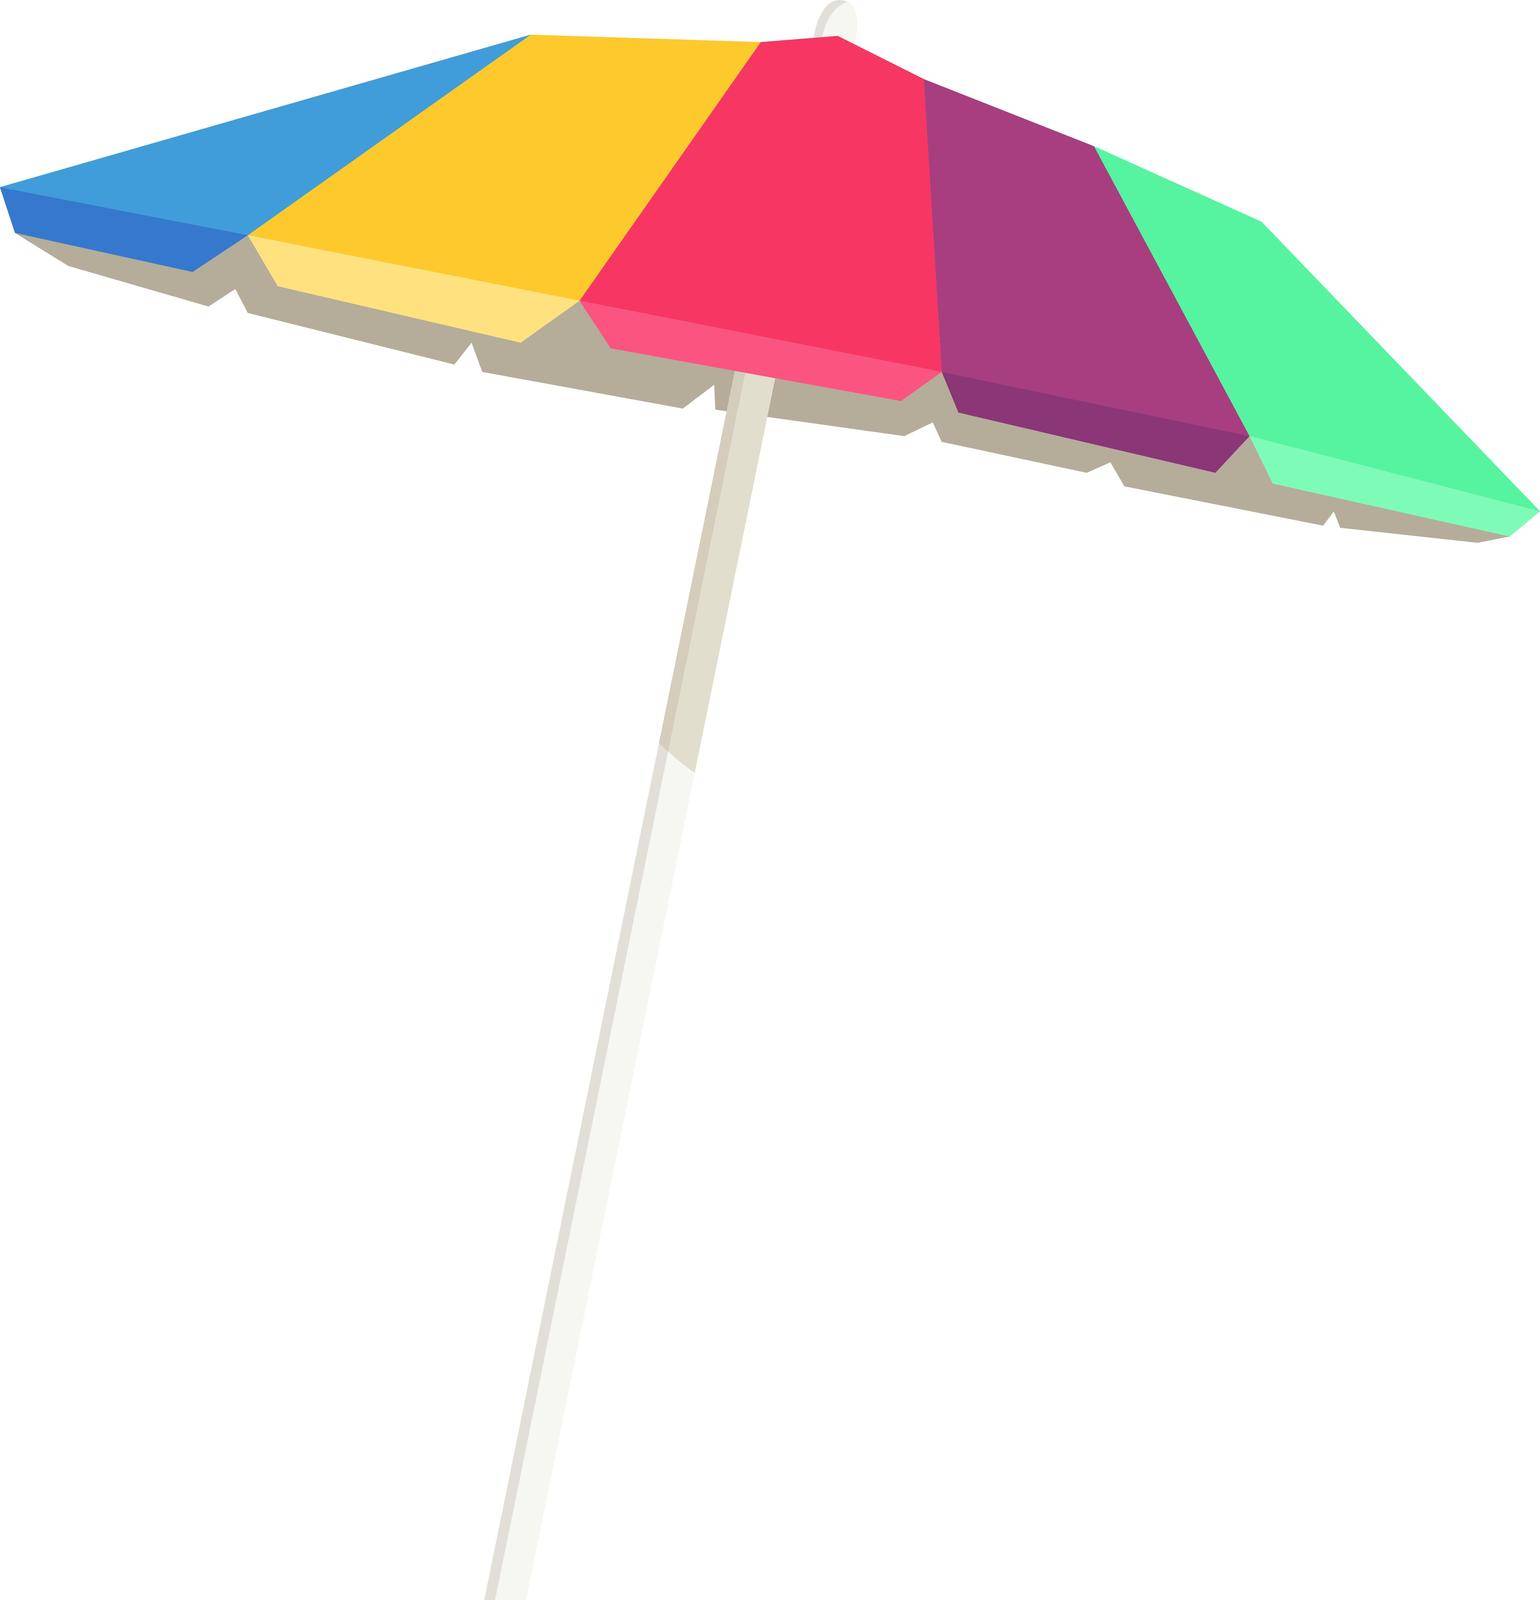 Beach umbrella. Colorful summer sunshade on metal pole by ONYXprj